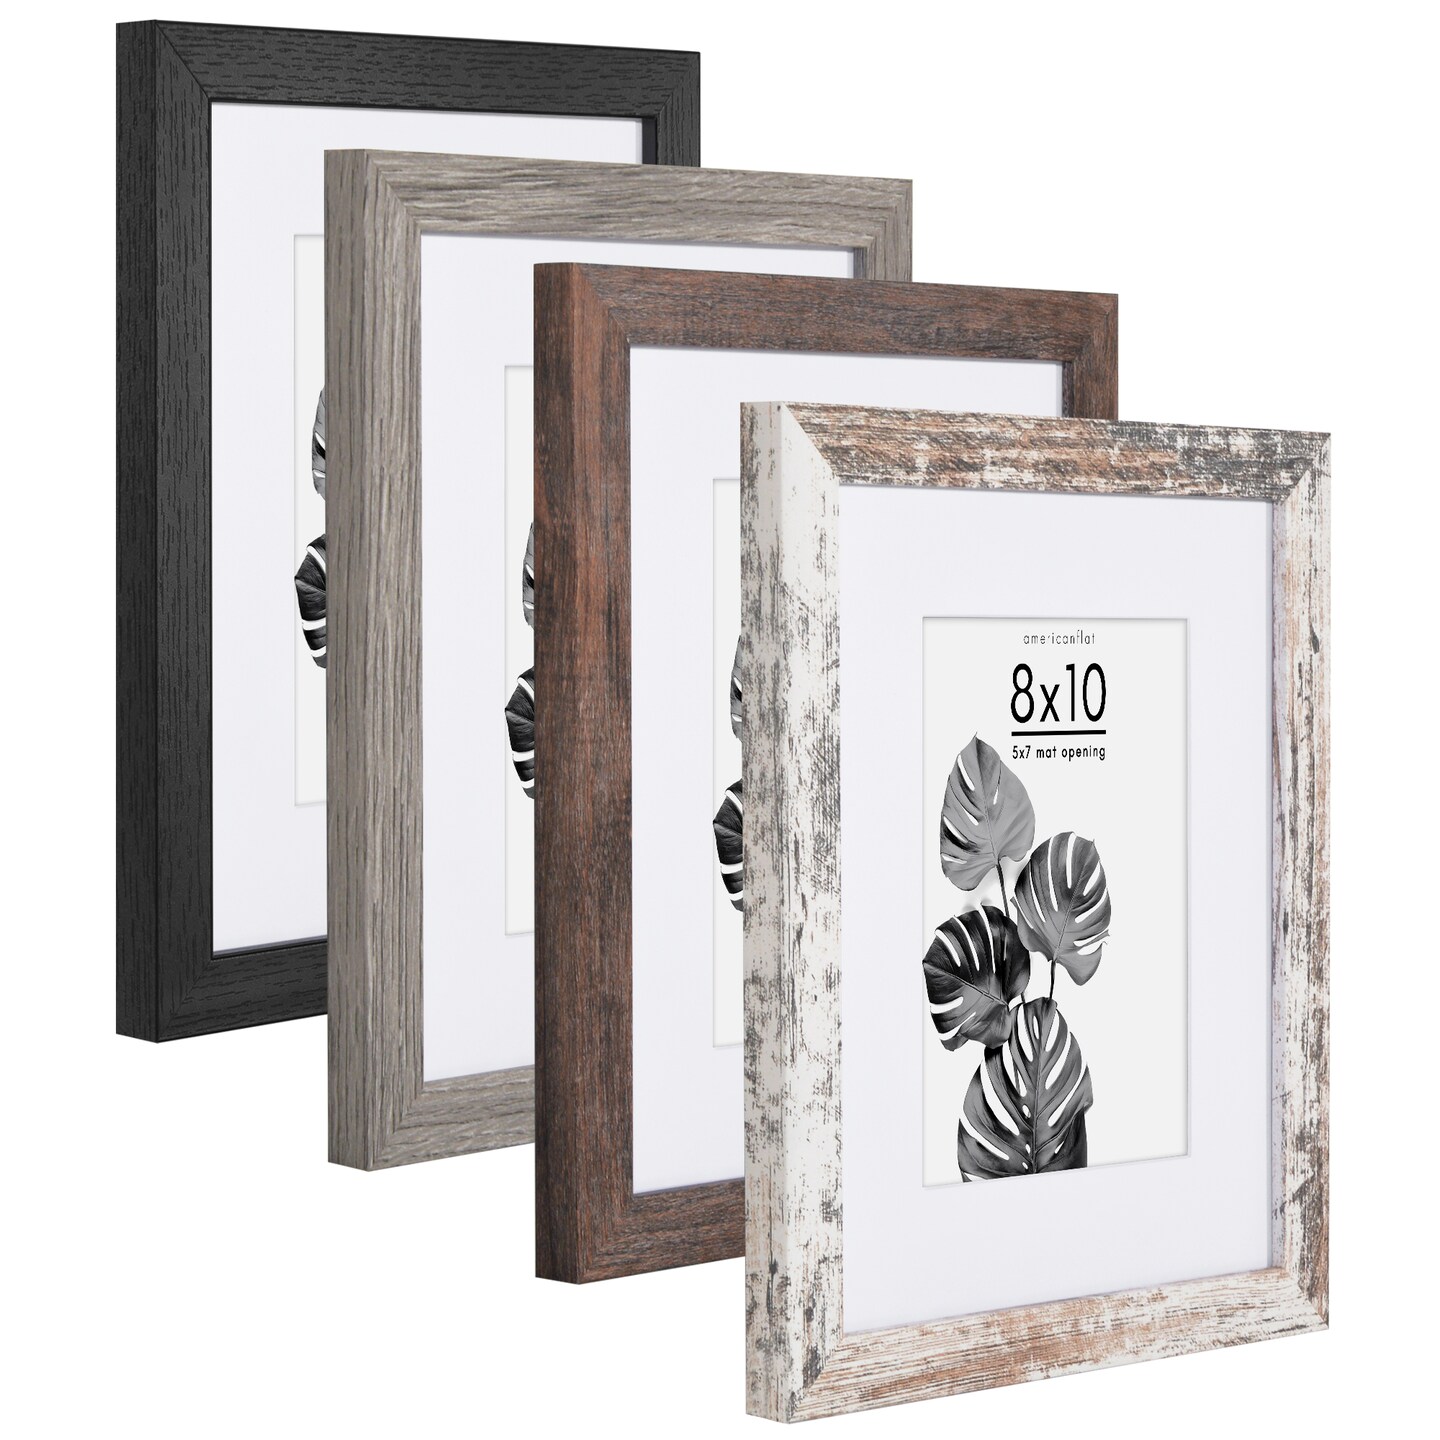 Americanflat Photo Frame Set with Mat - Set of 4 - Farmhouse Decor Picture Frames - Shatter Resistant Glass - Hanging Hardware - Includes Easel